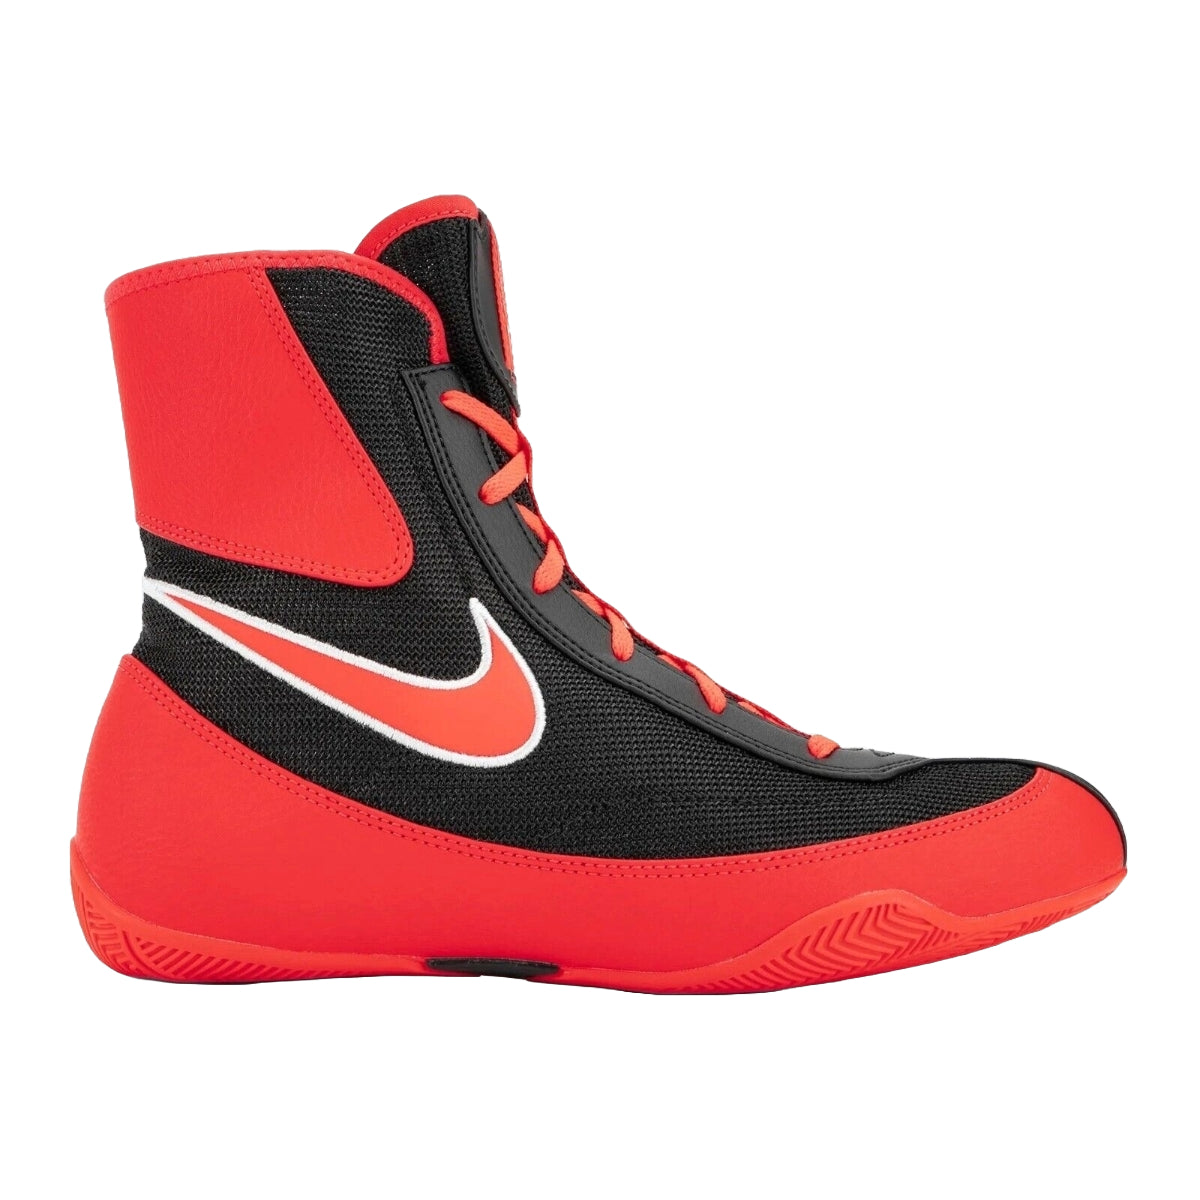 Red/Black Nike Machomai 2 Boxing Boots from Made4Fighters